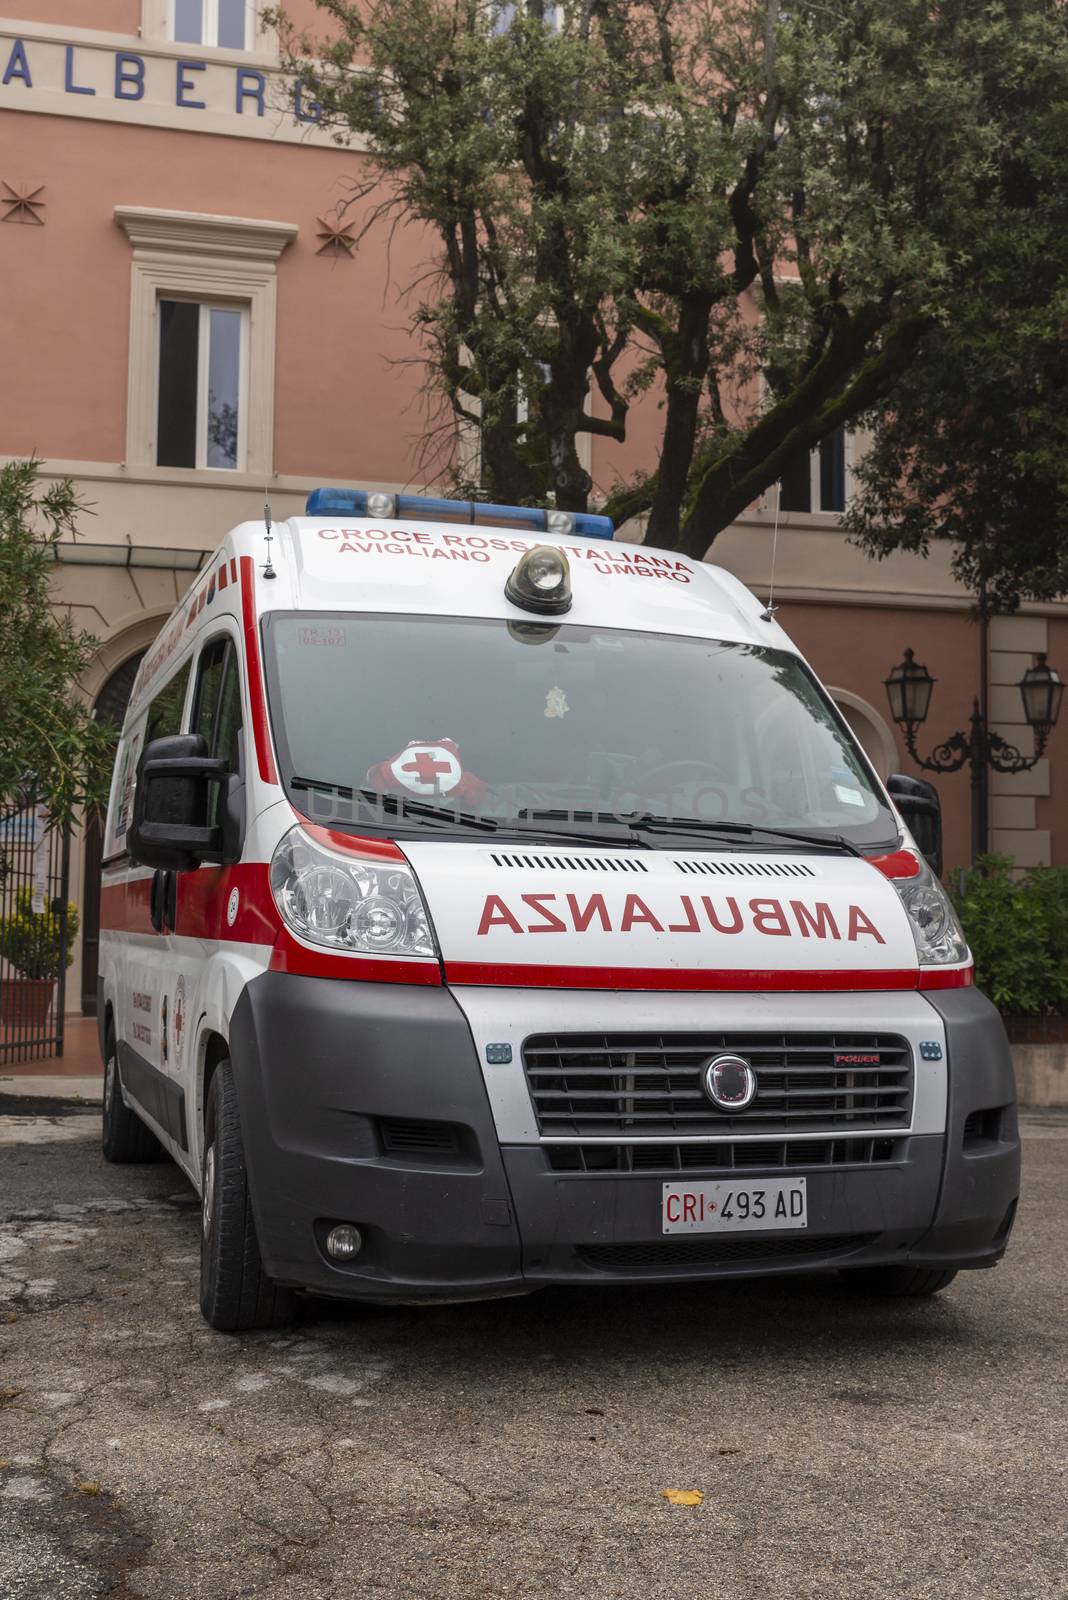 acquasparta,italy september 21 2020:ambulance for the rescue of people in the town of acquasparta